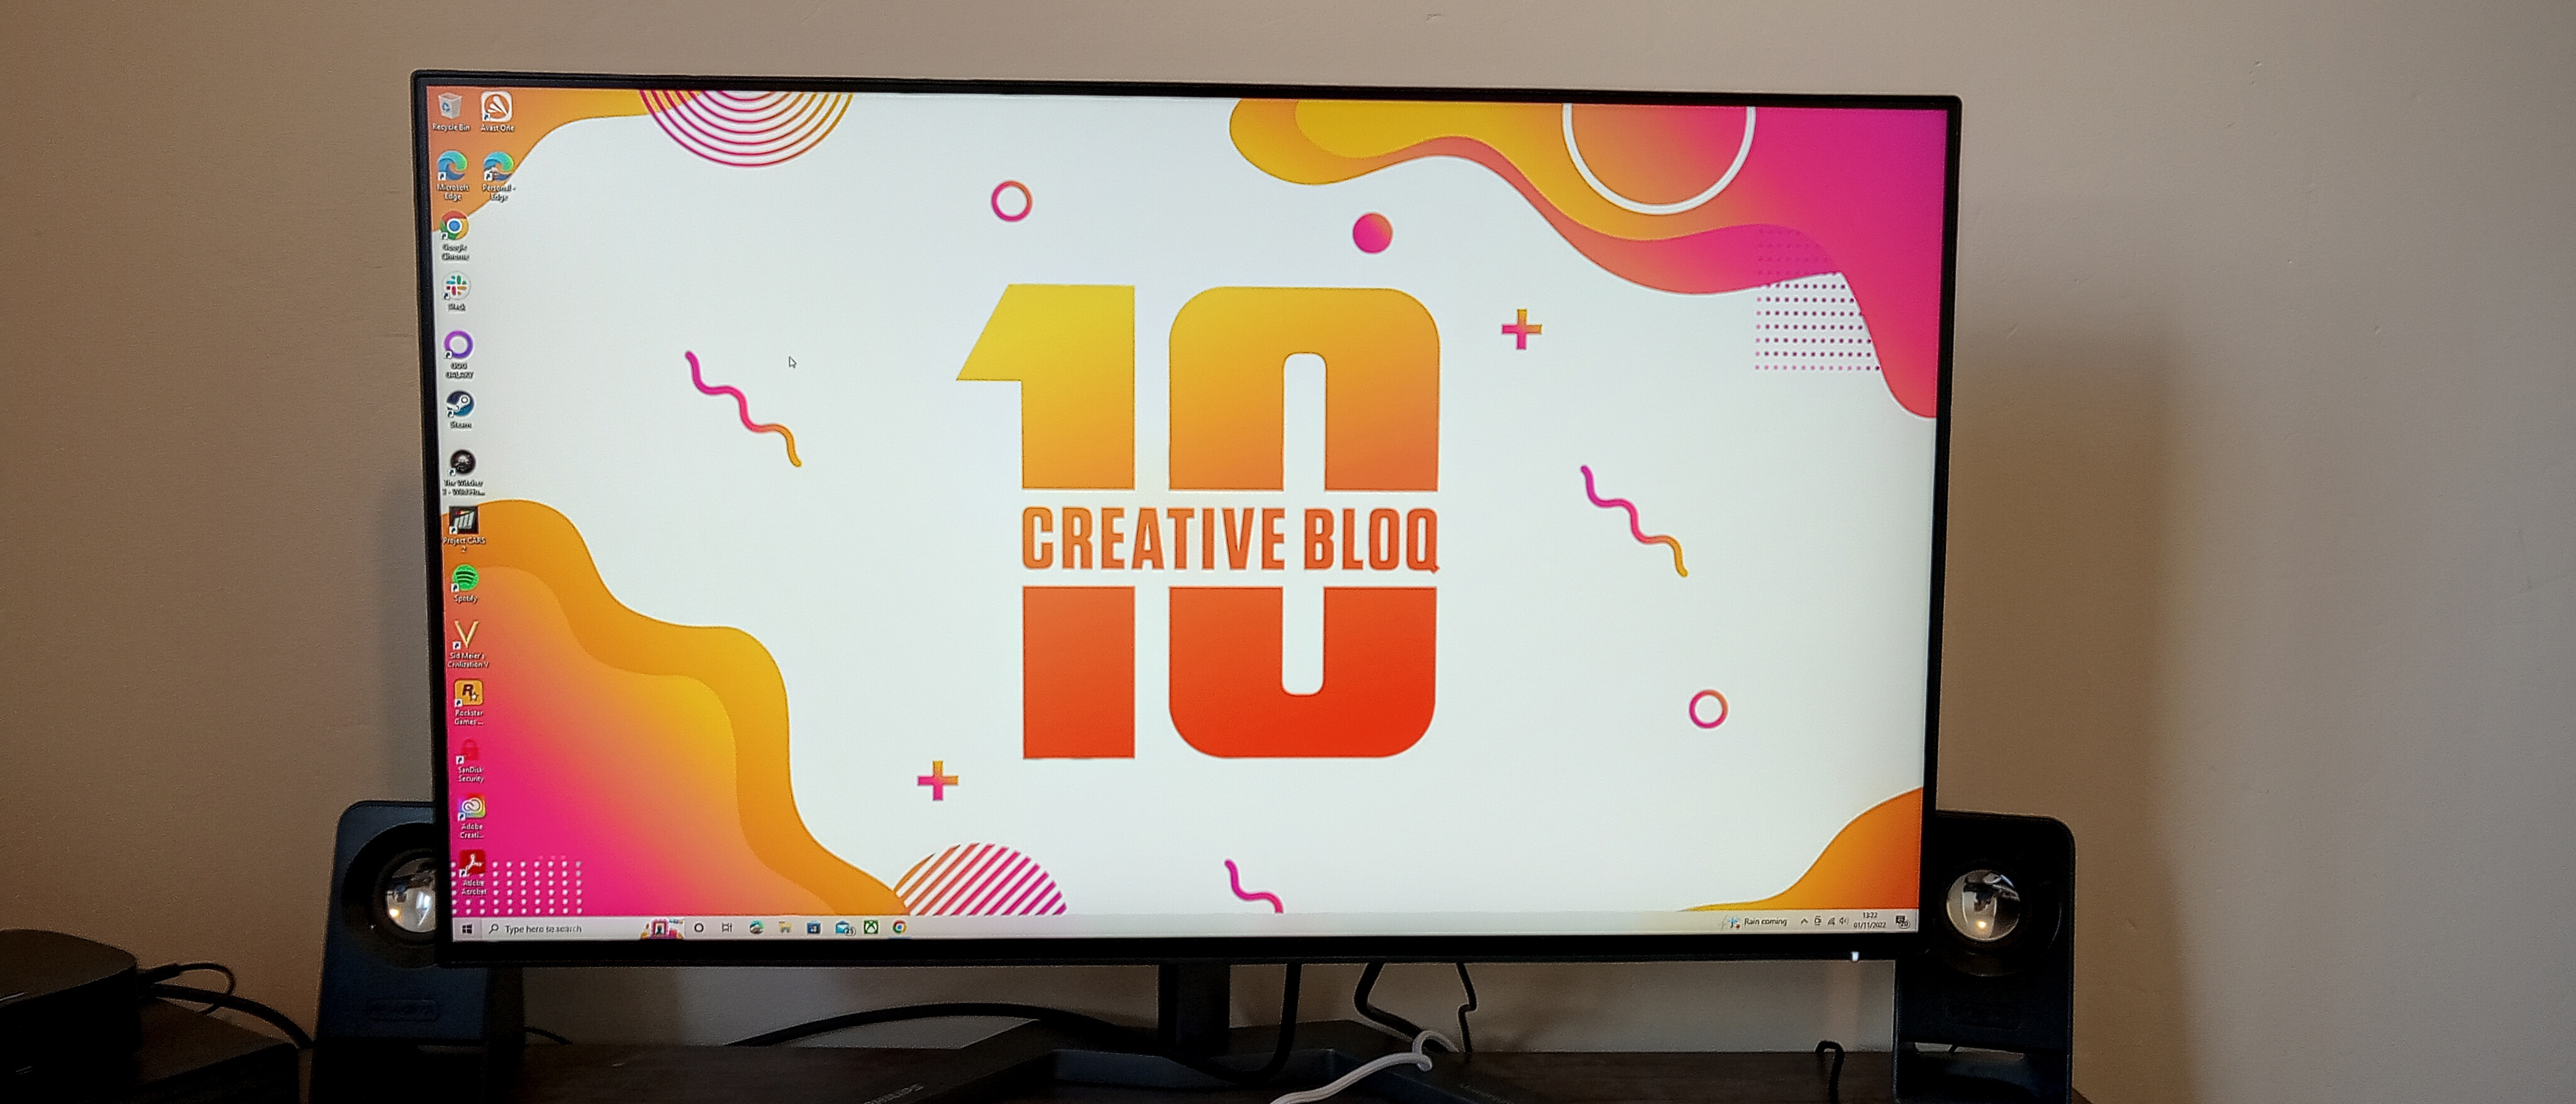 QHD Philips puts | Creative gaming 27M1F5500P monitor review: first Bloq